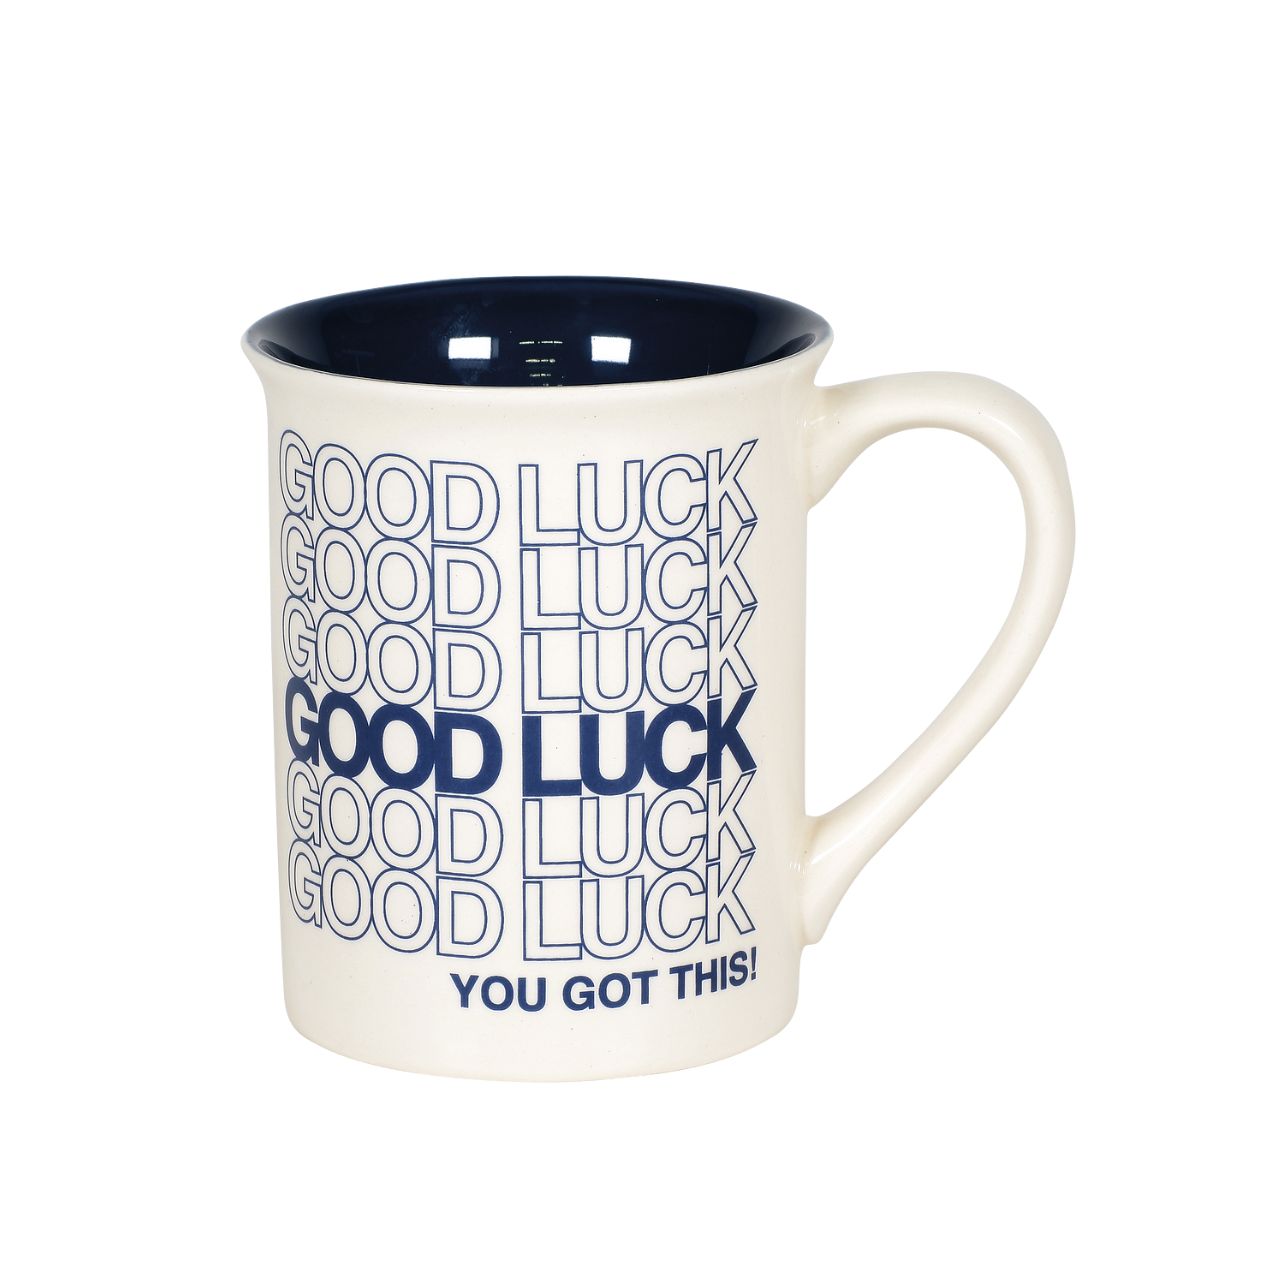 Good Luck Type Mug  Remind someone that you wish them all the luck in the world with this Good Luck mug. Securely packaged in decorative gift box. High-quality stoneware material is dishwasher and microwave safe.